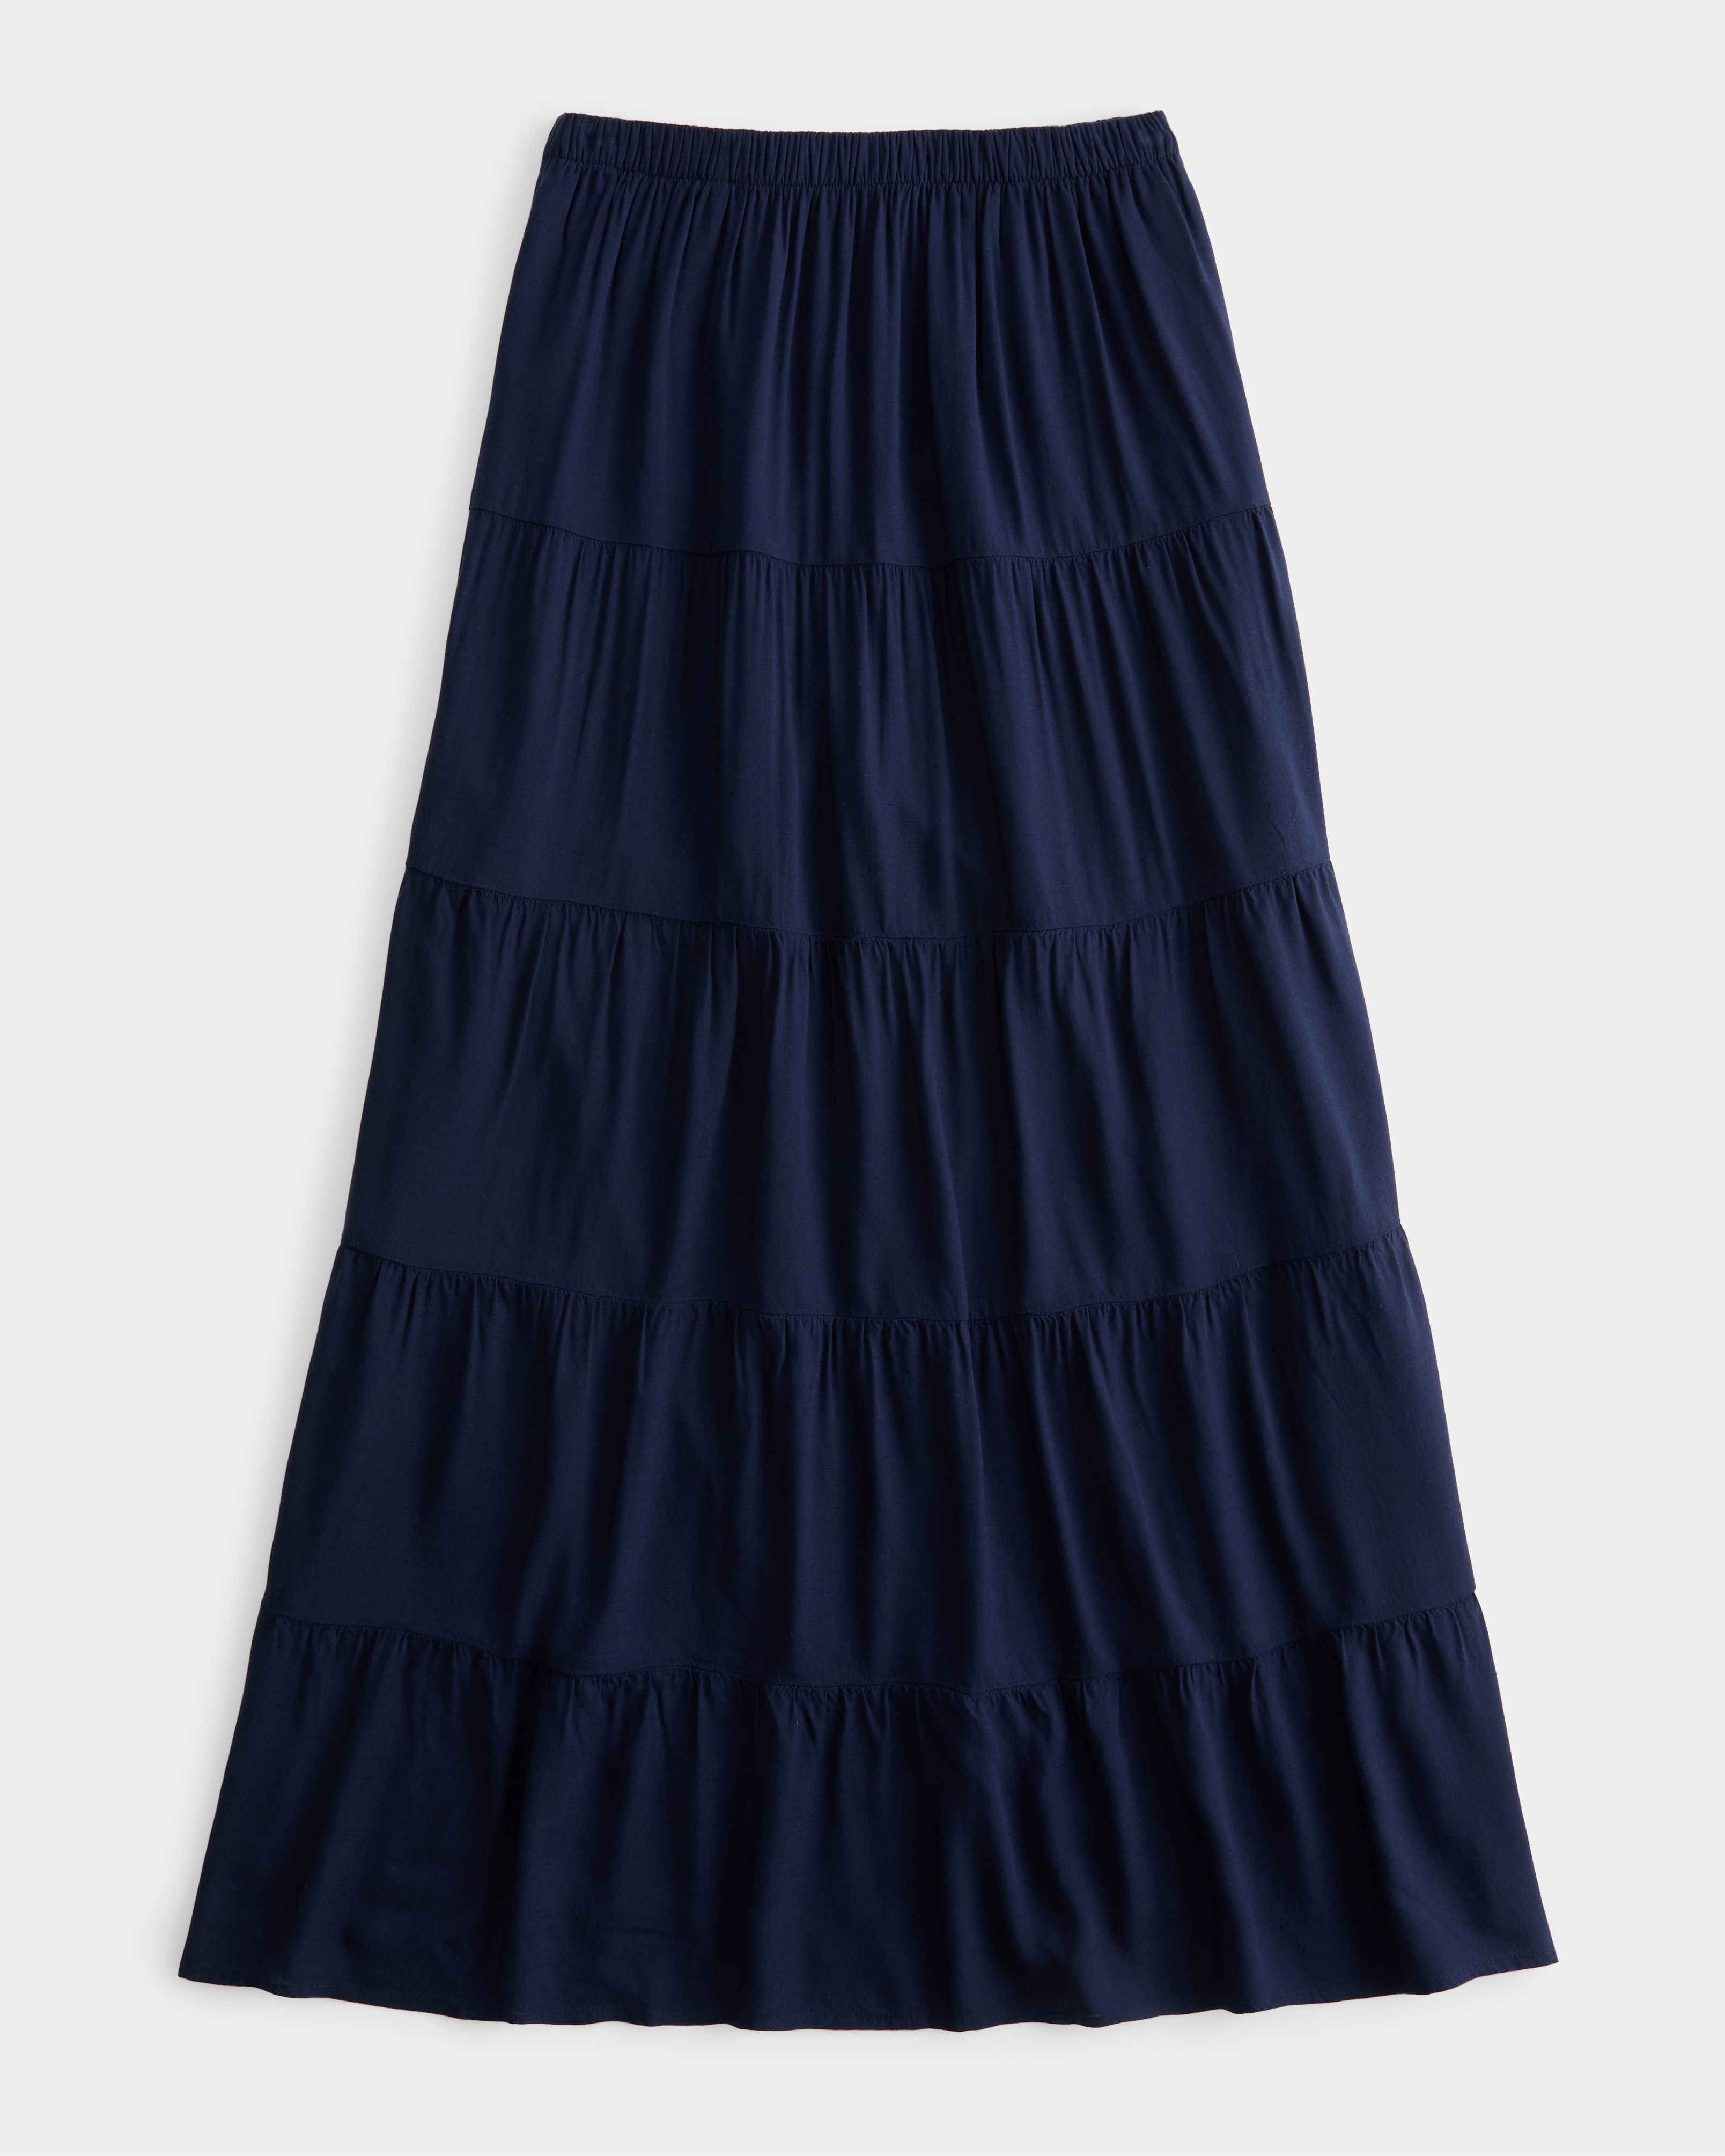 Adjustable Rise Five-Tiered Maxi Skirt